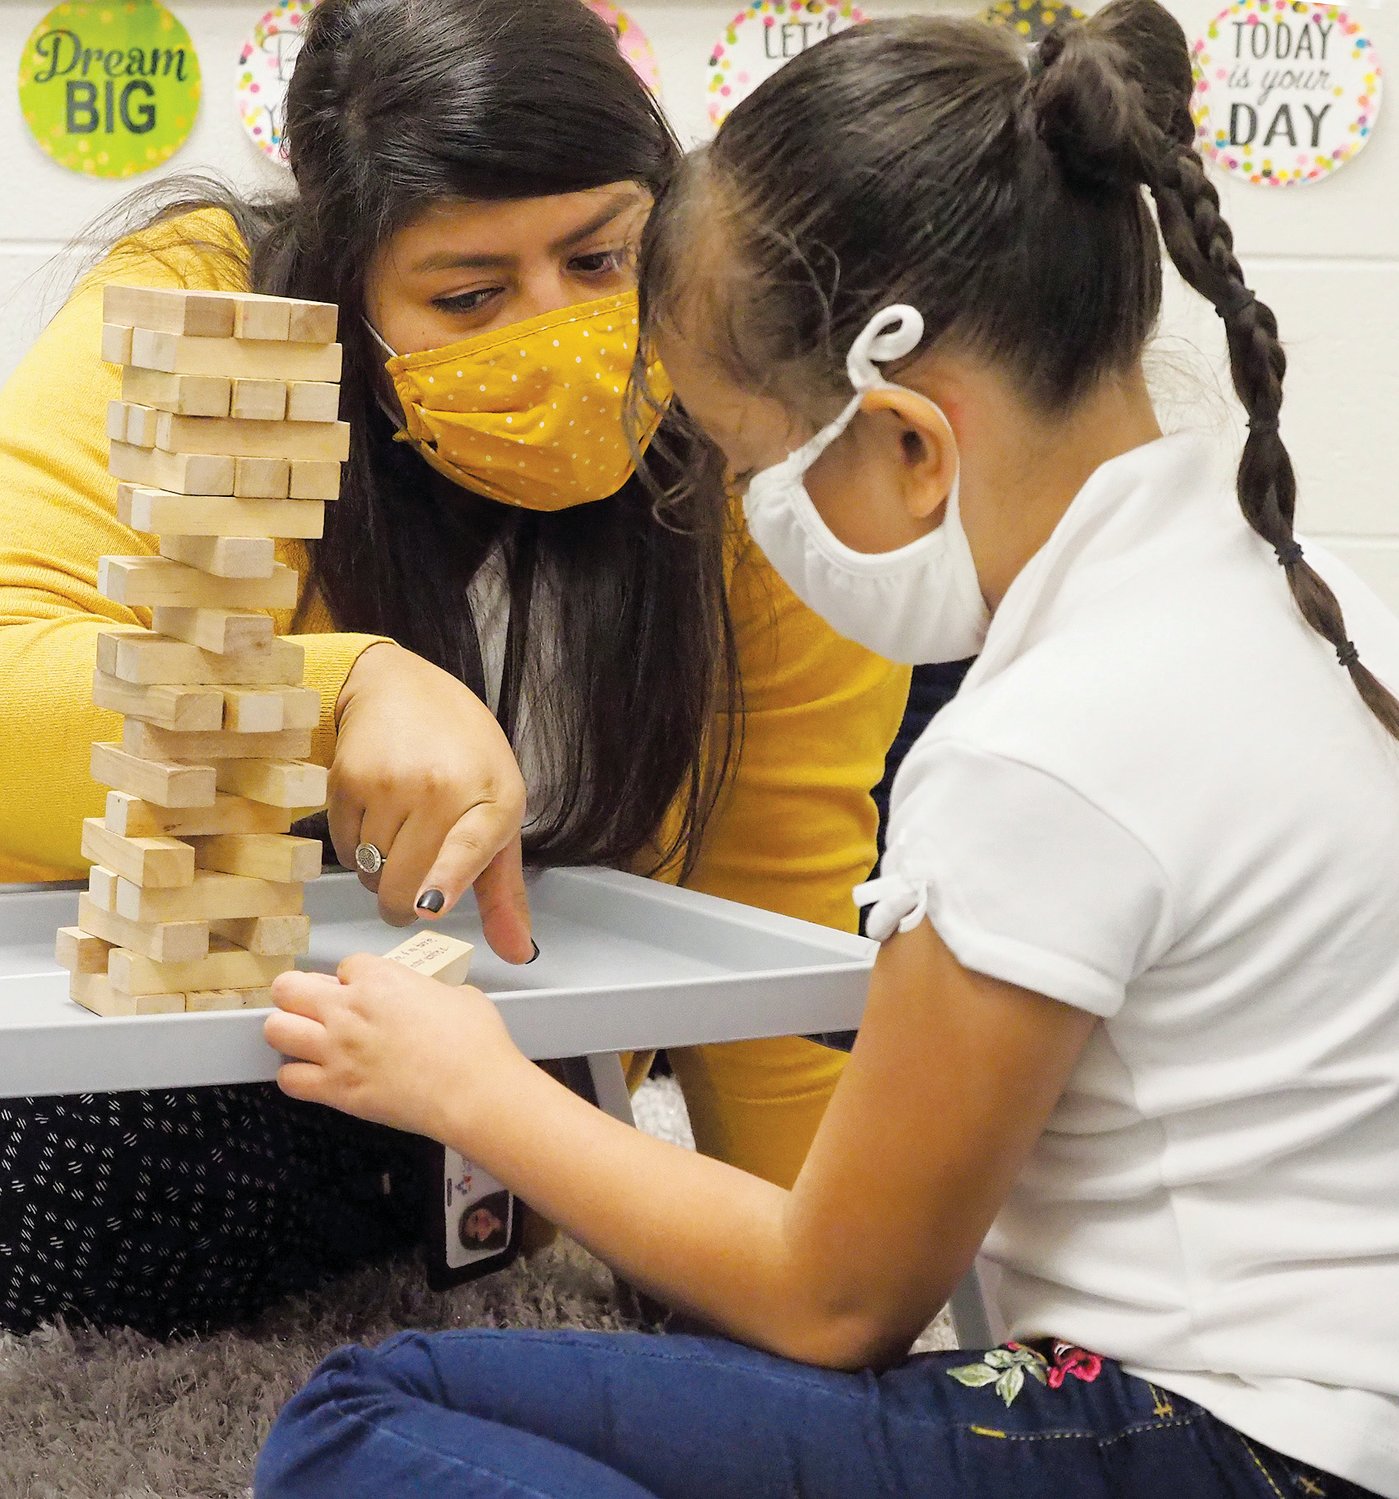 Eva Depaz, a CIS student support specialist at Virginia Cross Elementary School, plays a game with Yosary, a 2nd grader, during one of their sessions together in mid-October. The game allows each person to get to know the other: After building a tower out of wooden blocks, each player takes out a block and answers the question on each block until the tower collapses.